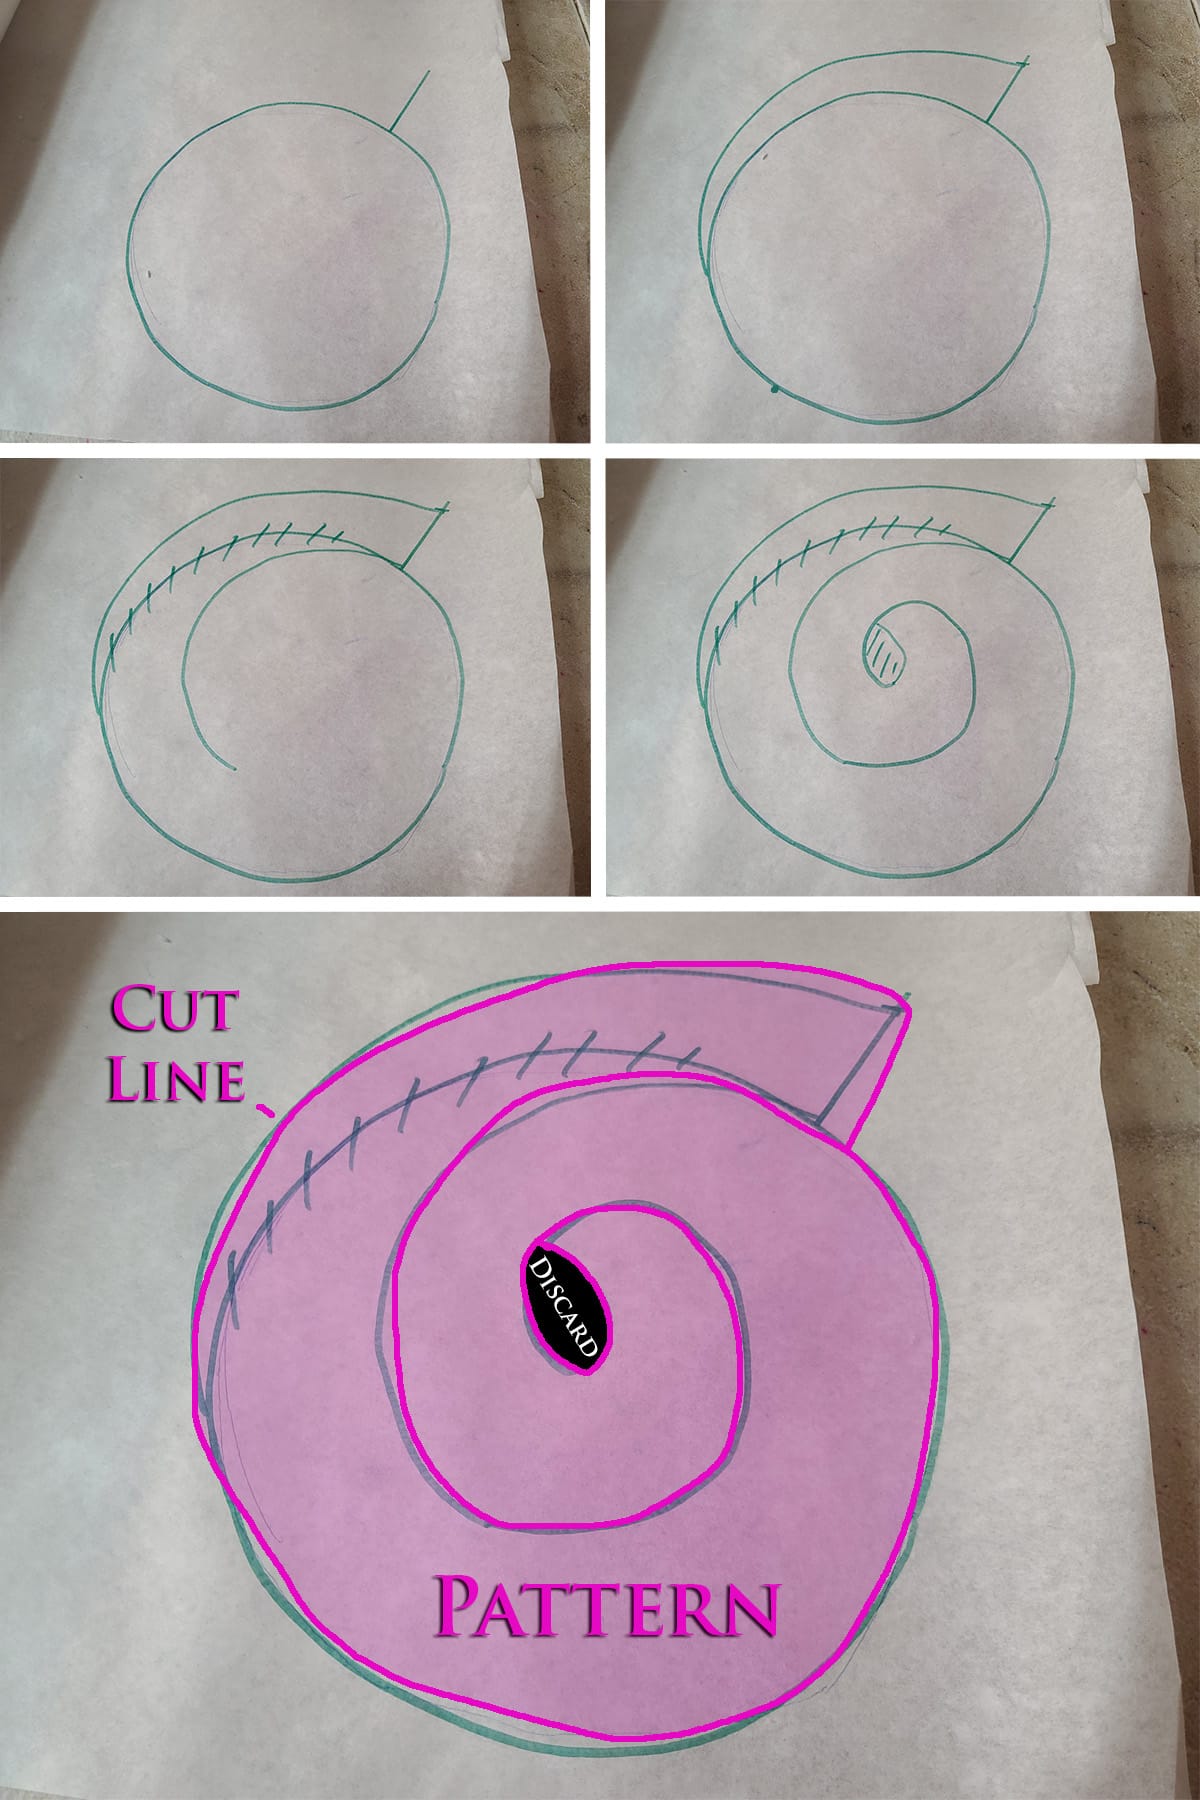 A 5 part image showing the spiral pattern being drawn, as described.